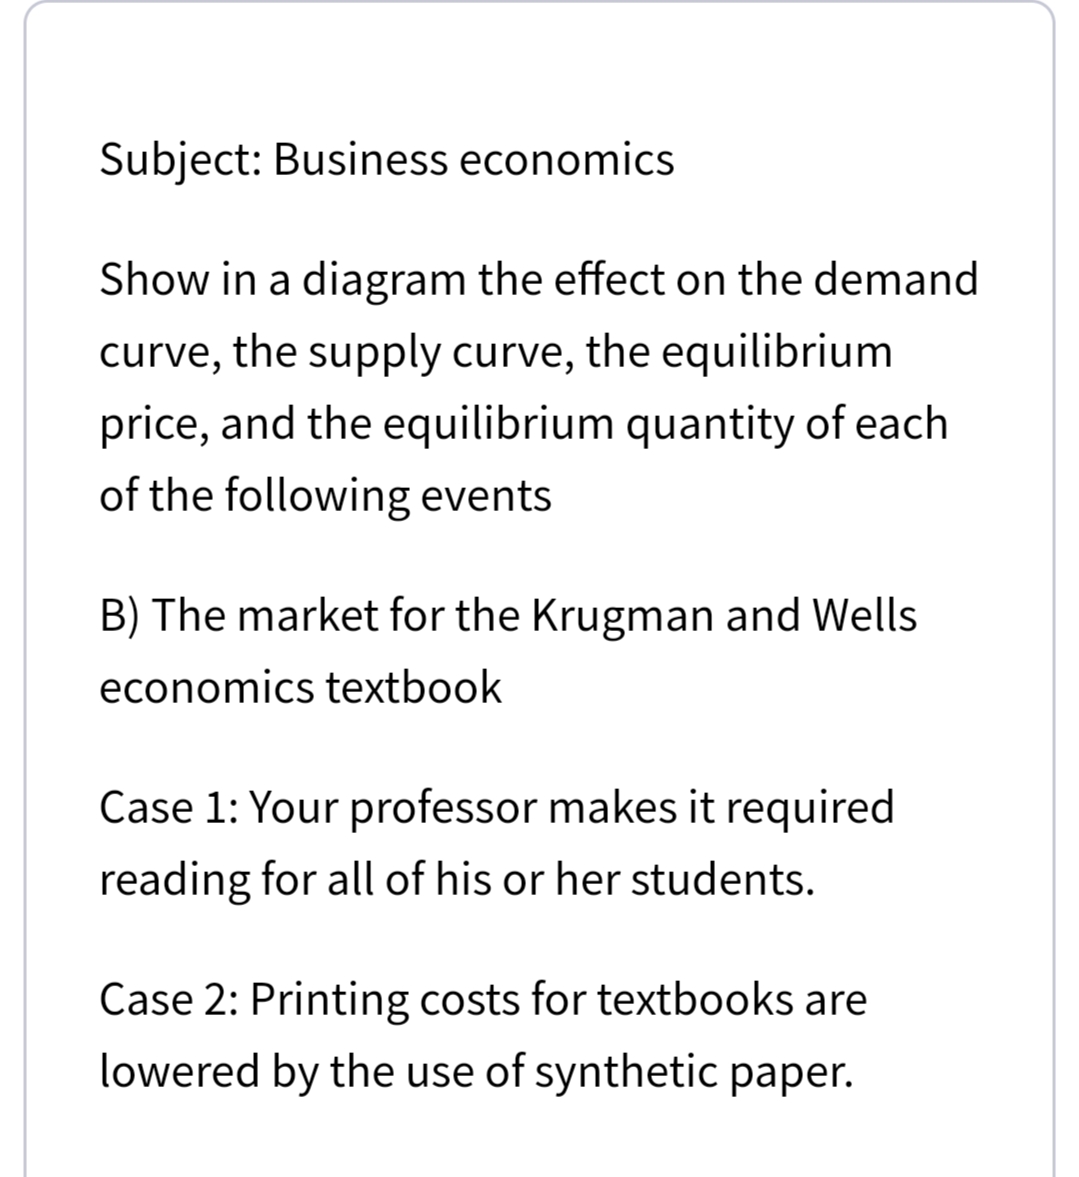 Subject: Business economics
Show in a diagram the effect on the demand
curve, the supply curve, the equilibrium
price, and the equilibrium quantity of each
of the following events
B) The market for the Krugman and Wells
economics textbook
Case 1: Your professor makes it required
reading for all of his or her students.
Case 2: Printing costs for textbooks are
lowered by the use of synthetic paper.